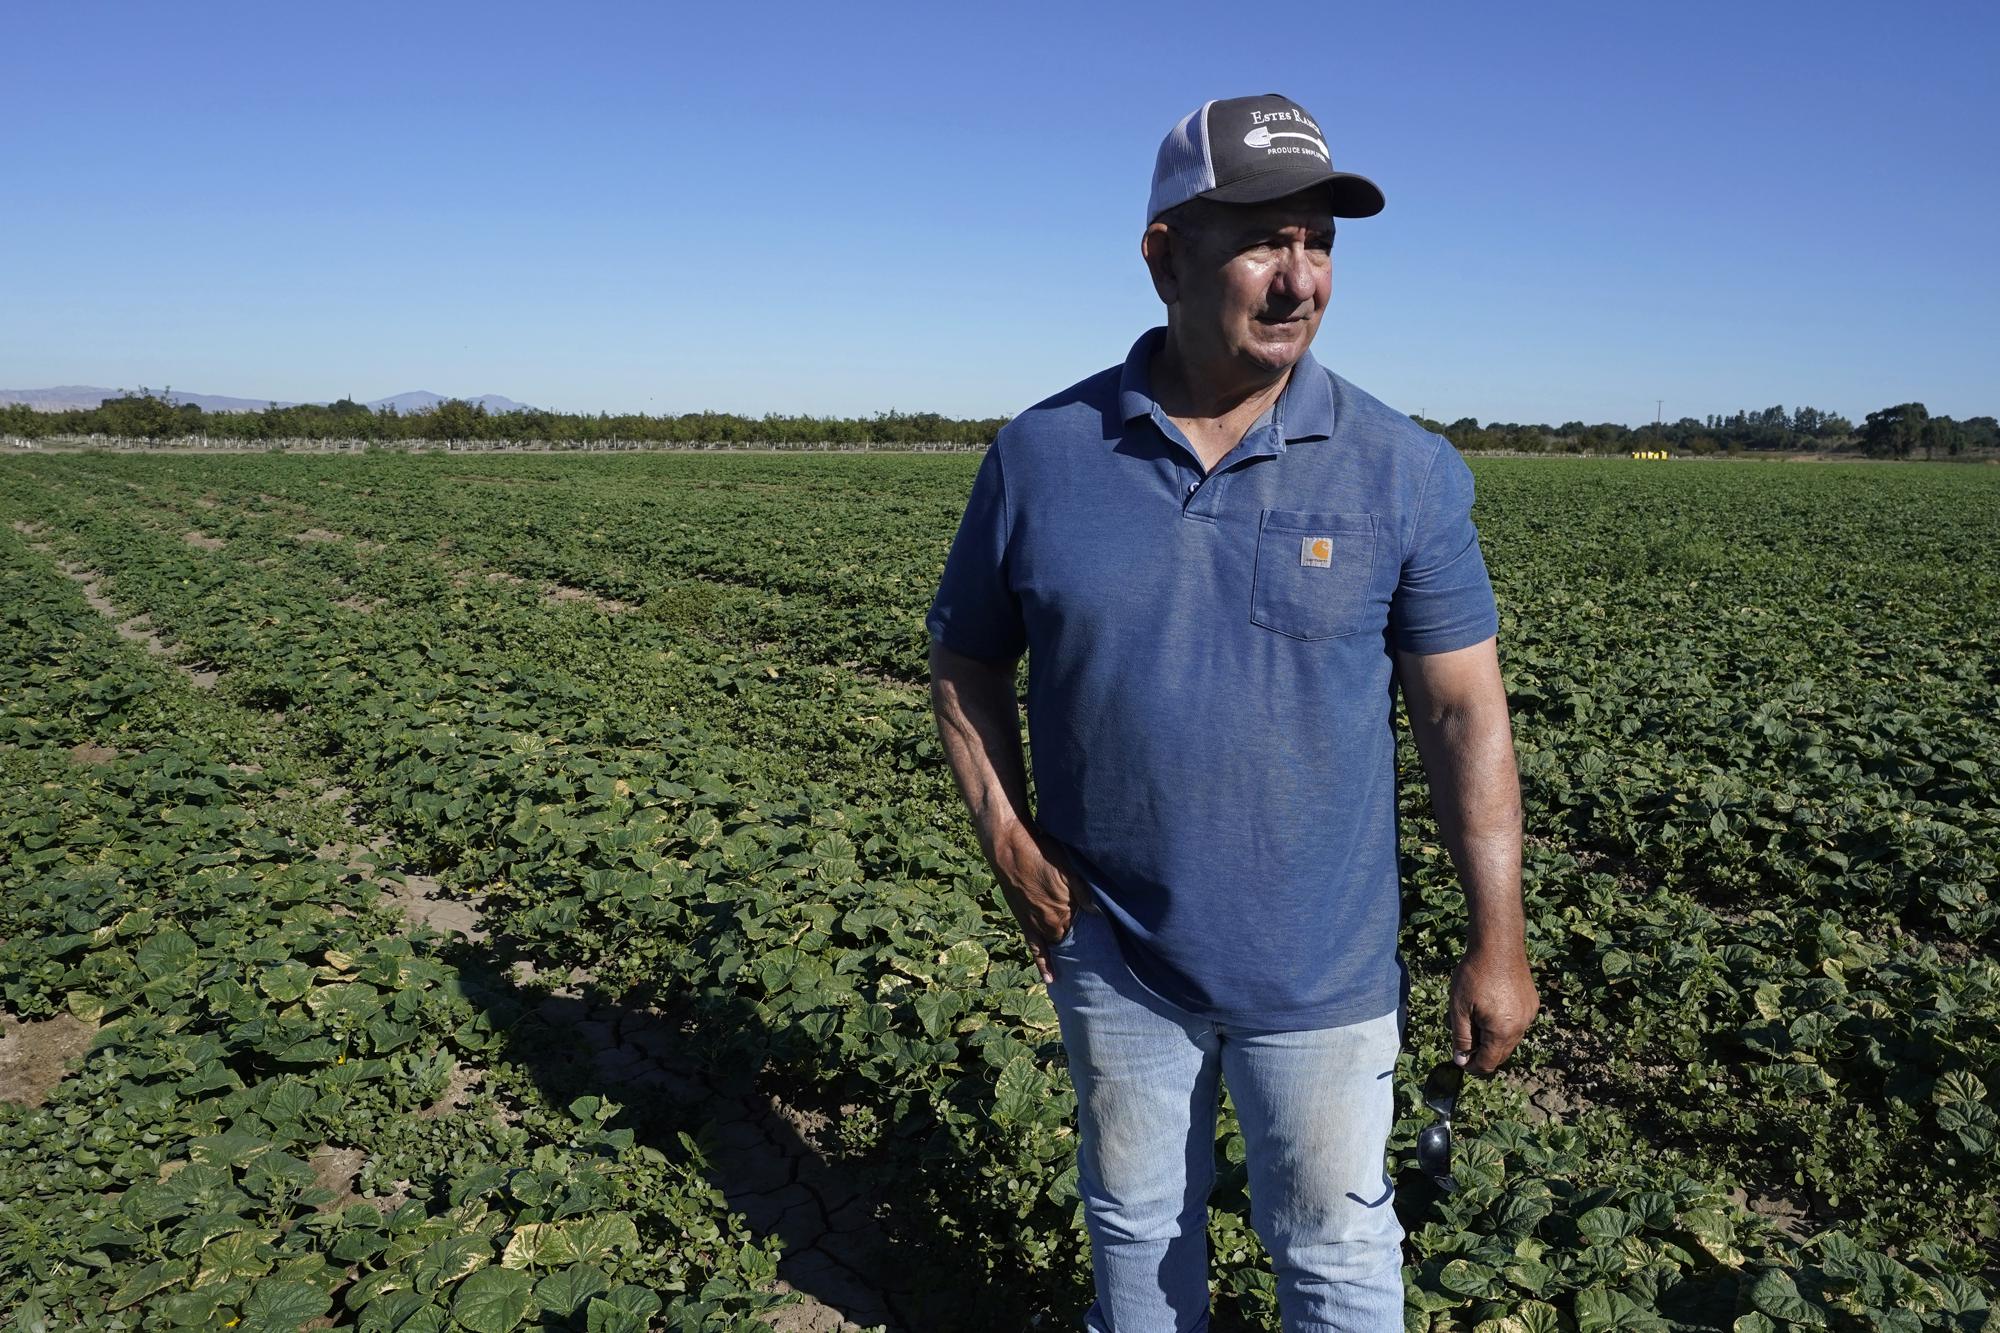 Farmer Bobby Costa stands in his cucumber field, on Thursday, July 21, 2022, near Tracy, Calif. Some of the state’s major rivers are getting saltier in drought, including the ones that provide water for Costa’s crop. His cucumber yields go down by 25% this year compared to a wetter year. (AP Photo/Rich Pedroncelli)